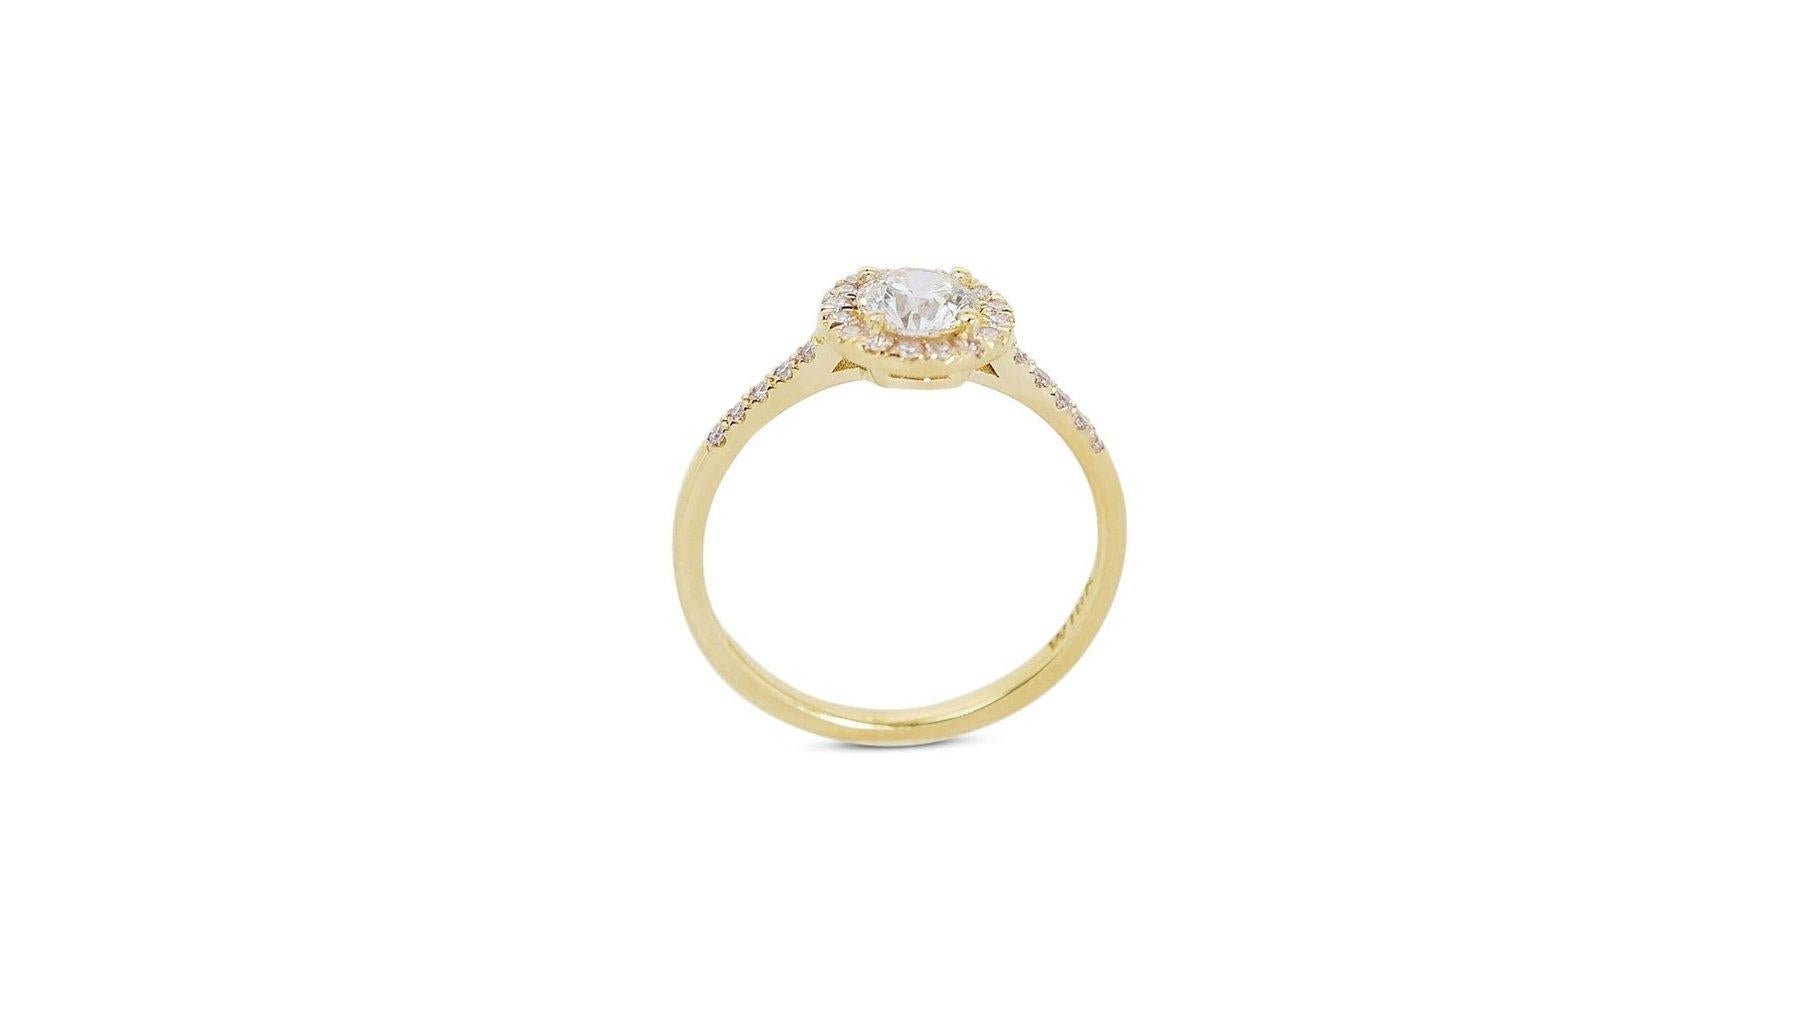 Dazzling 1.36ct Diamonds Halo Ring in 18k Yellow Gold - GIA Certified

Unveil the essence of timeless elegance with this classic 18k yellow gold halo ring, showcasing a magnificent 1.16-carat round diamond at its center. Complementing the central